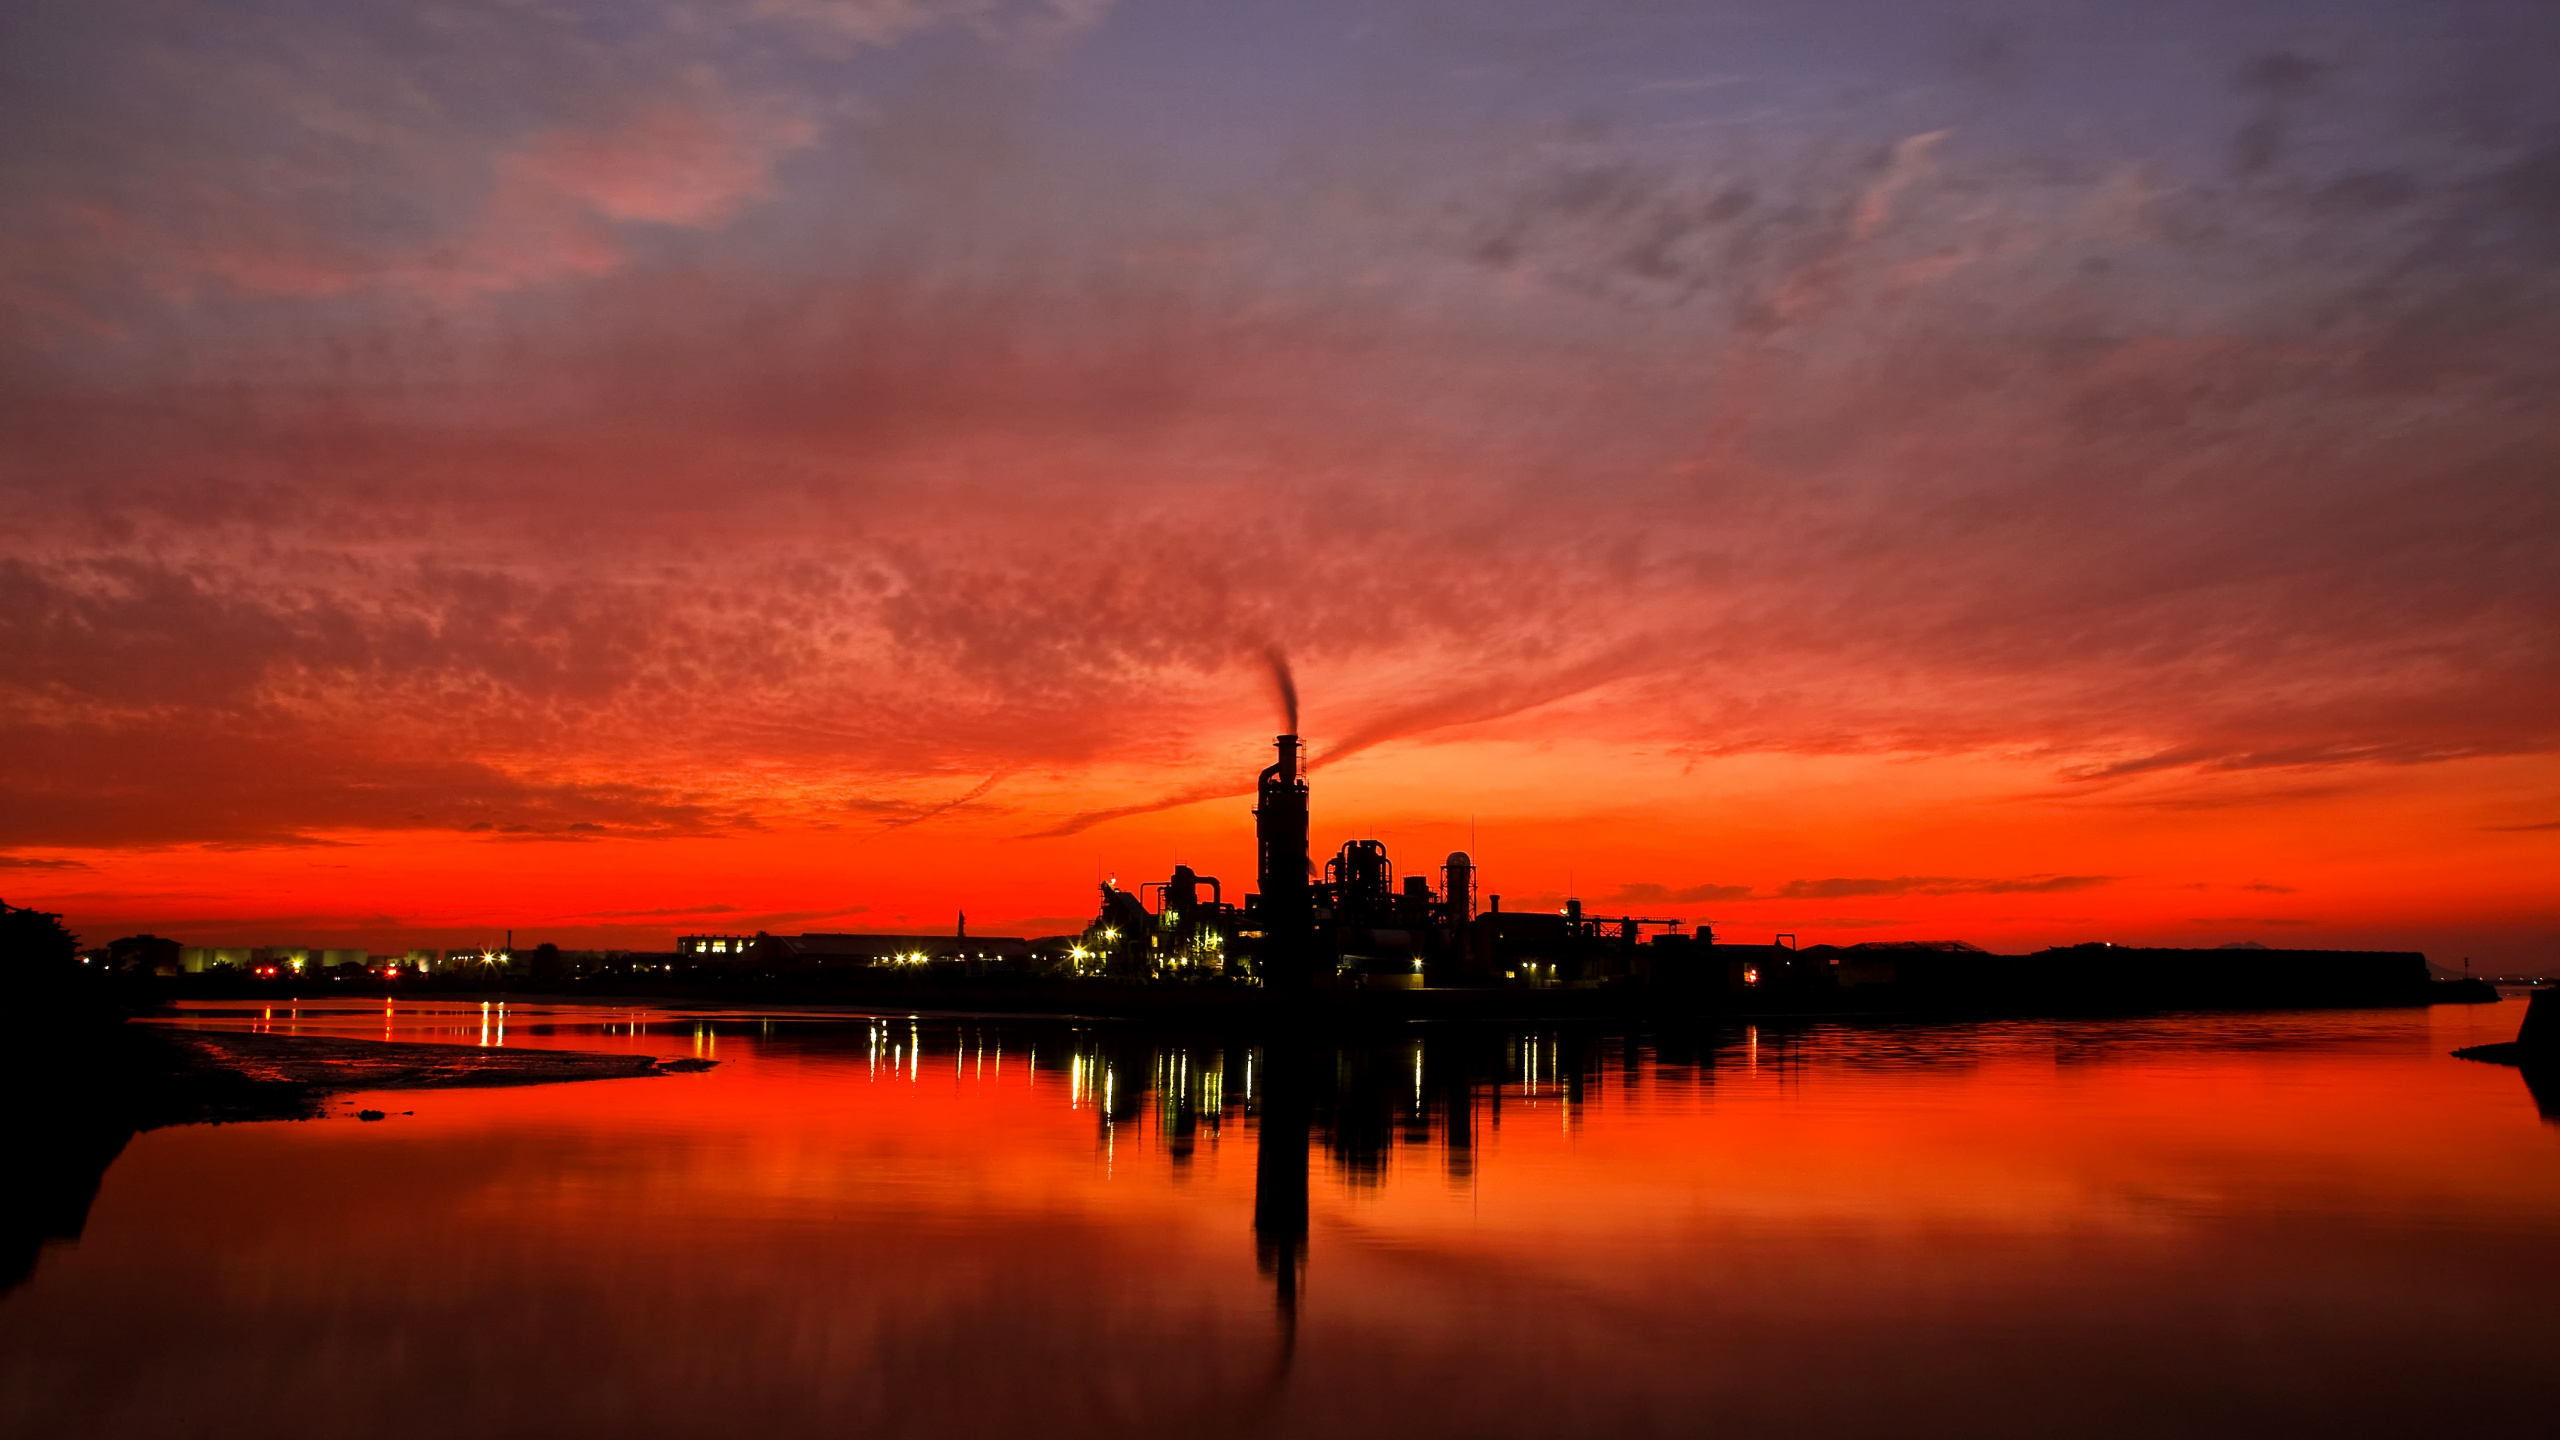 Silhouette of Building Near Body of Water During Sunset. Wallpaper in 2560x1440 Resolution